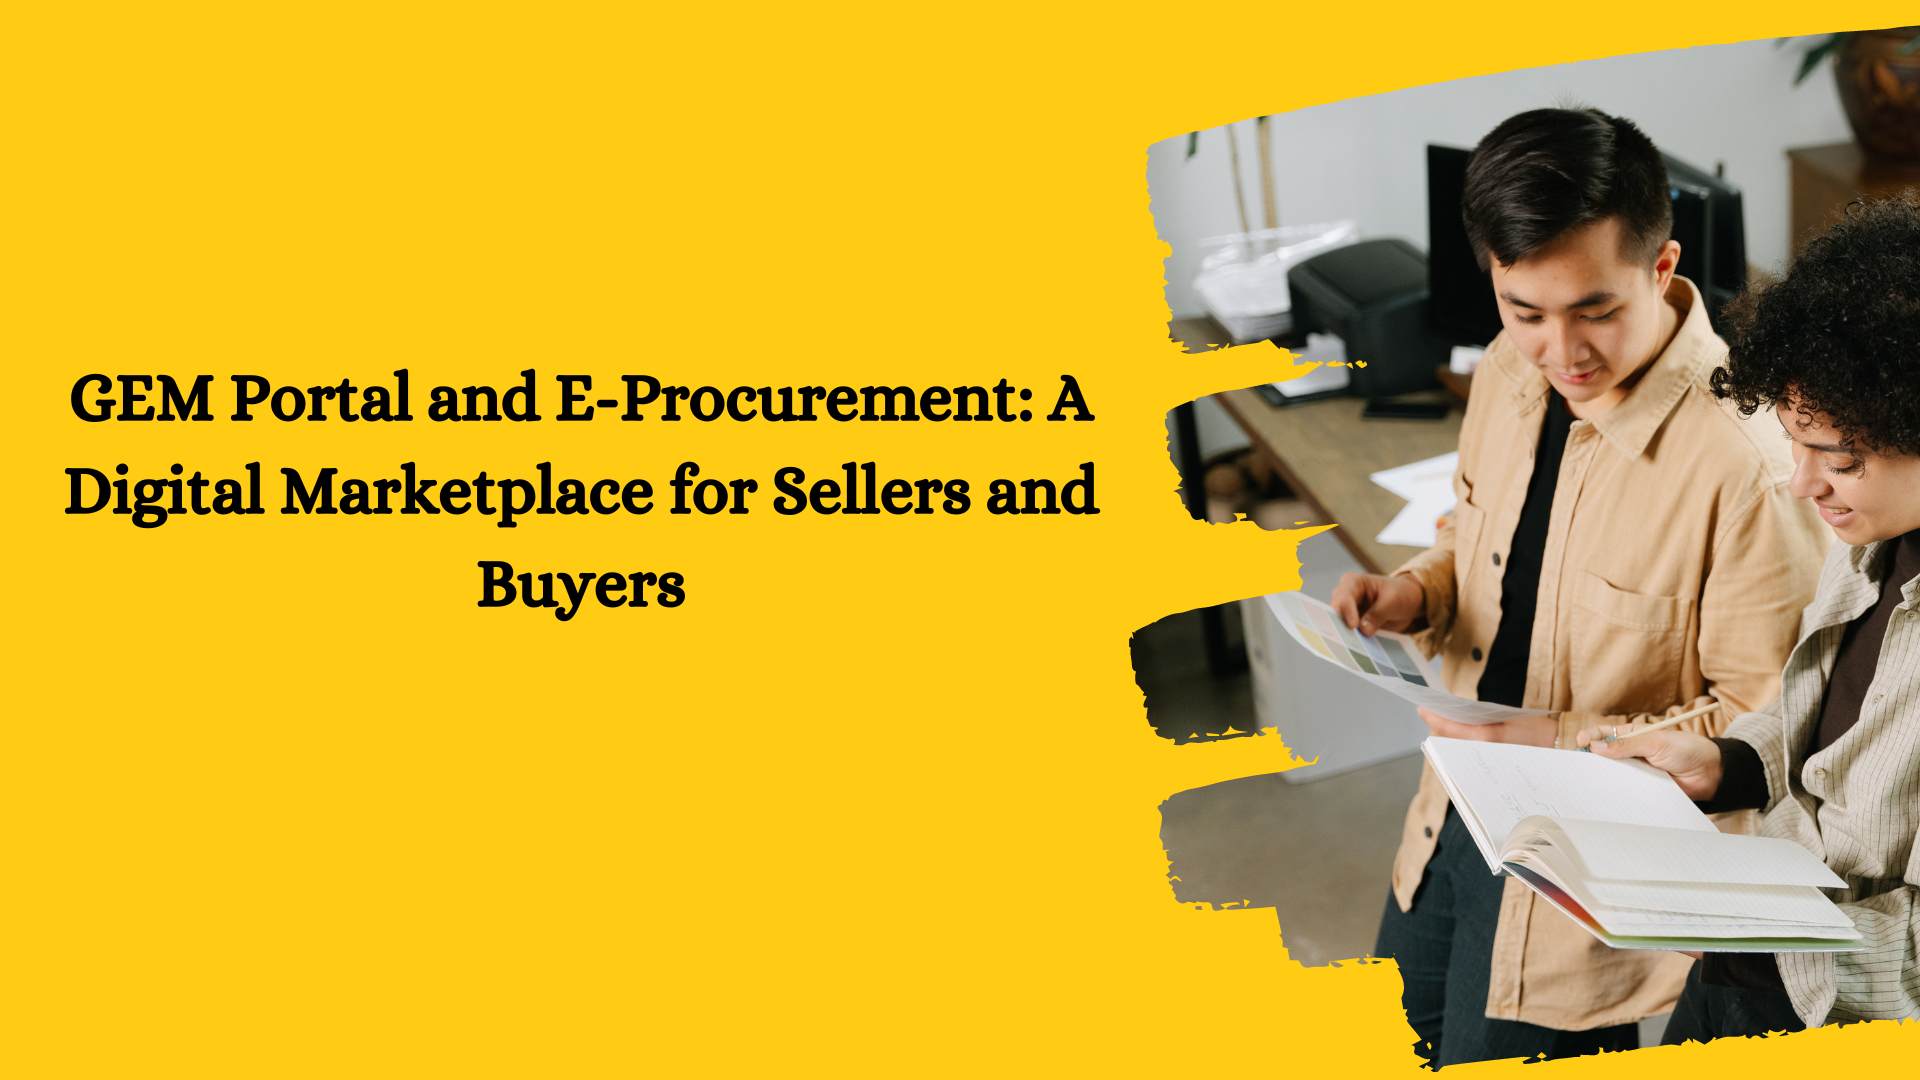 GEM Portal and E-Procurement: A Digital Marketplace for Sellers and Buyers